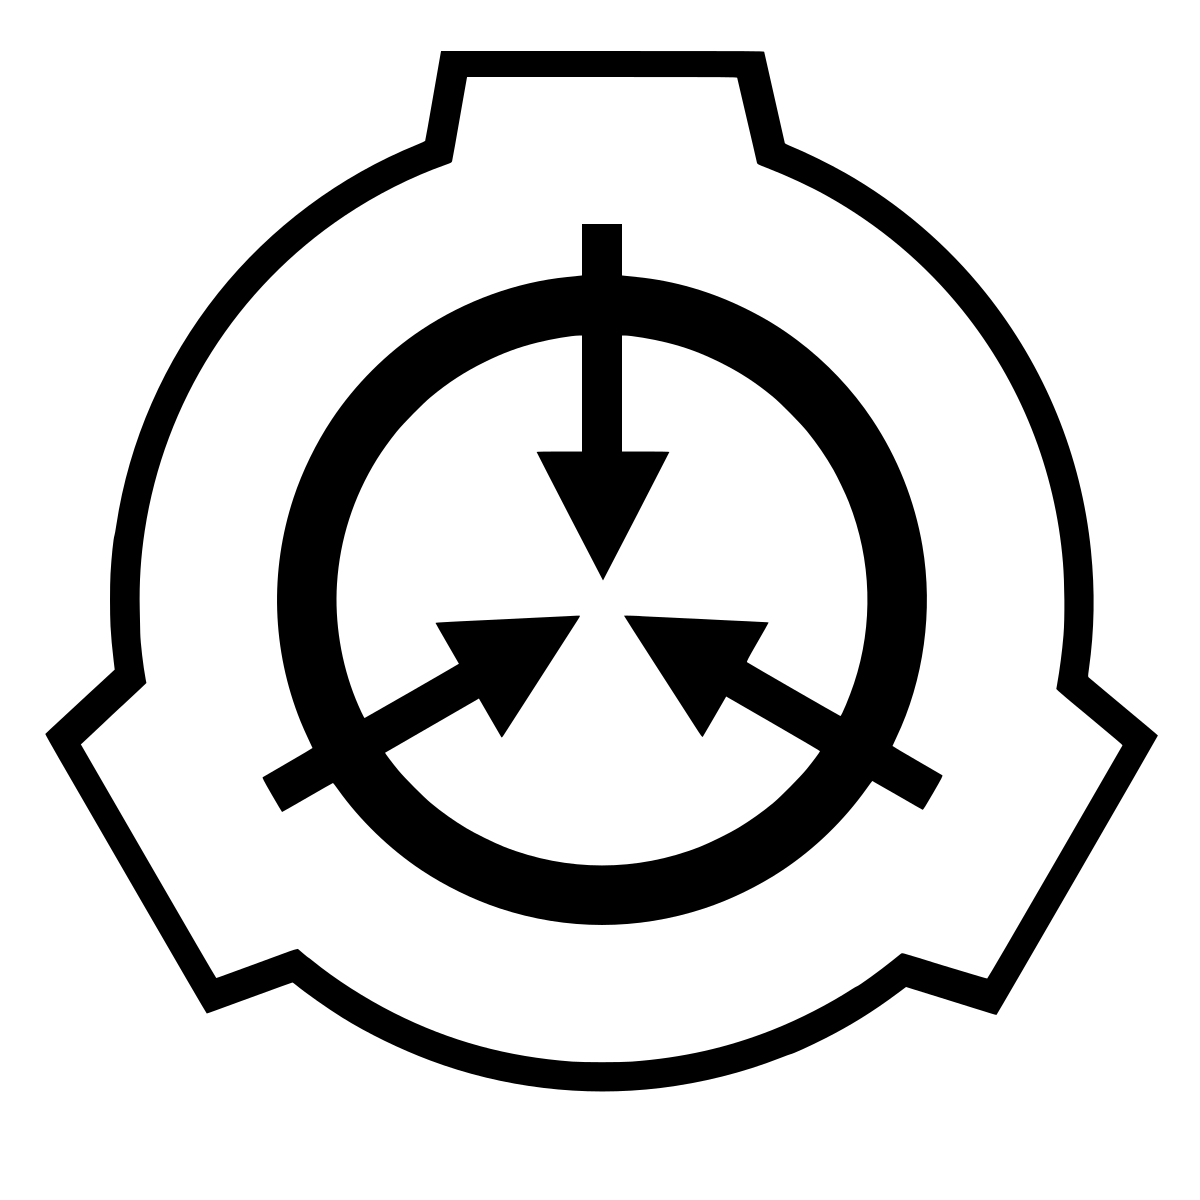 SCP-3000-J - SCP Foundation